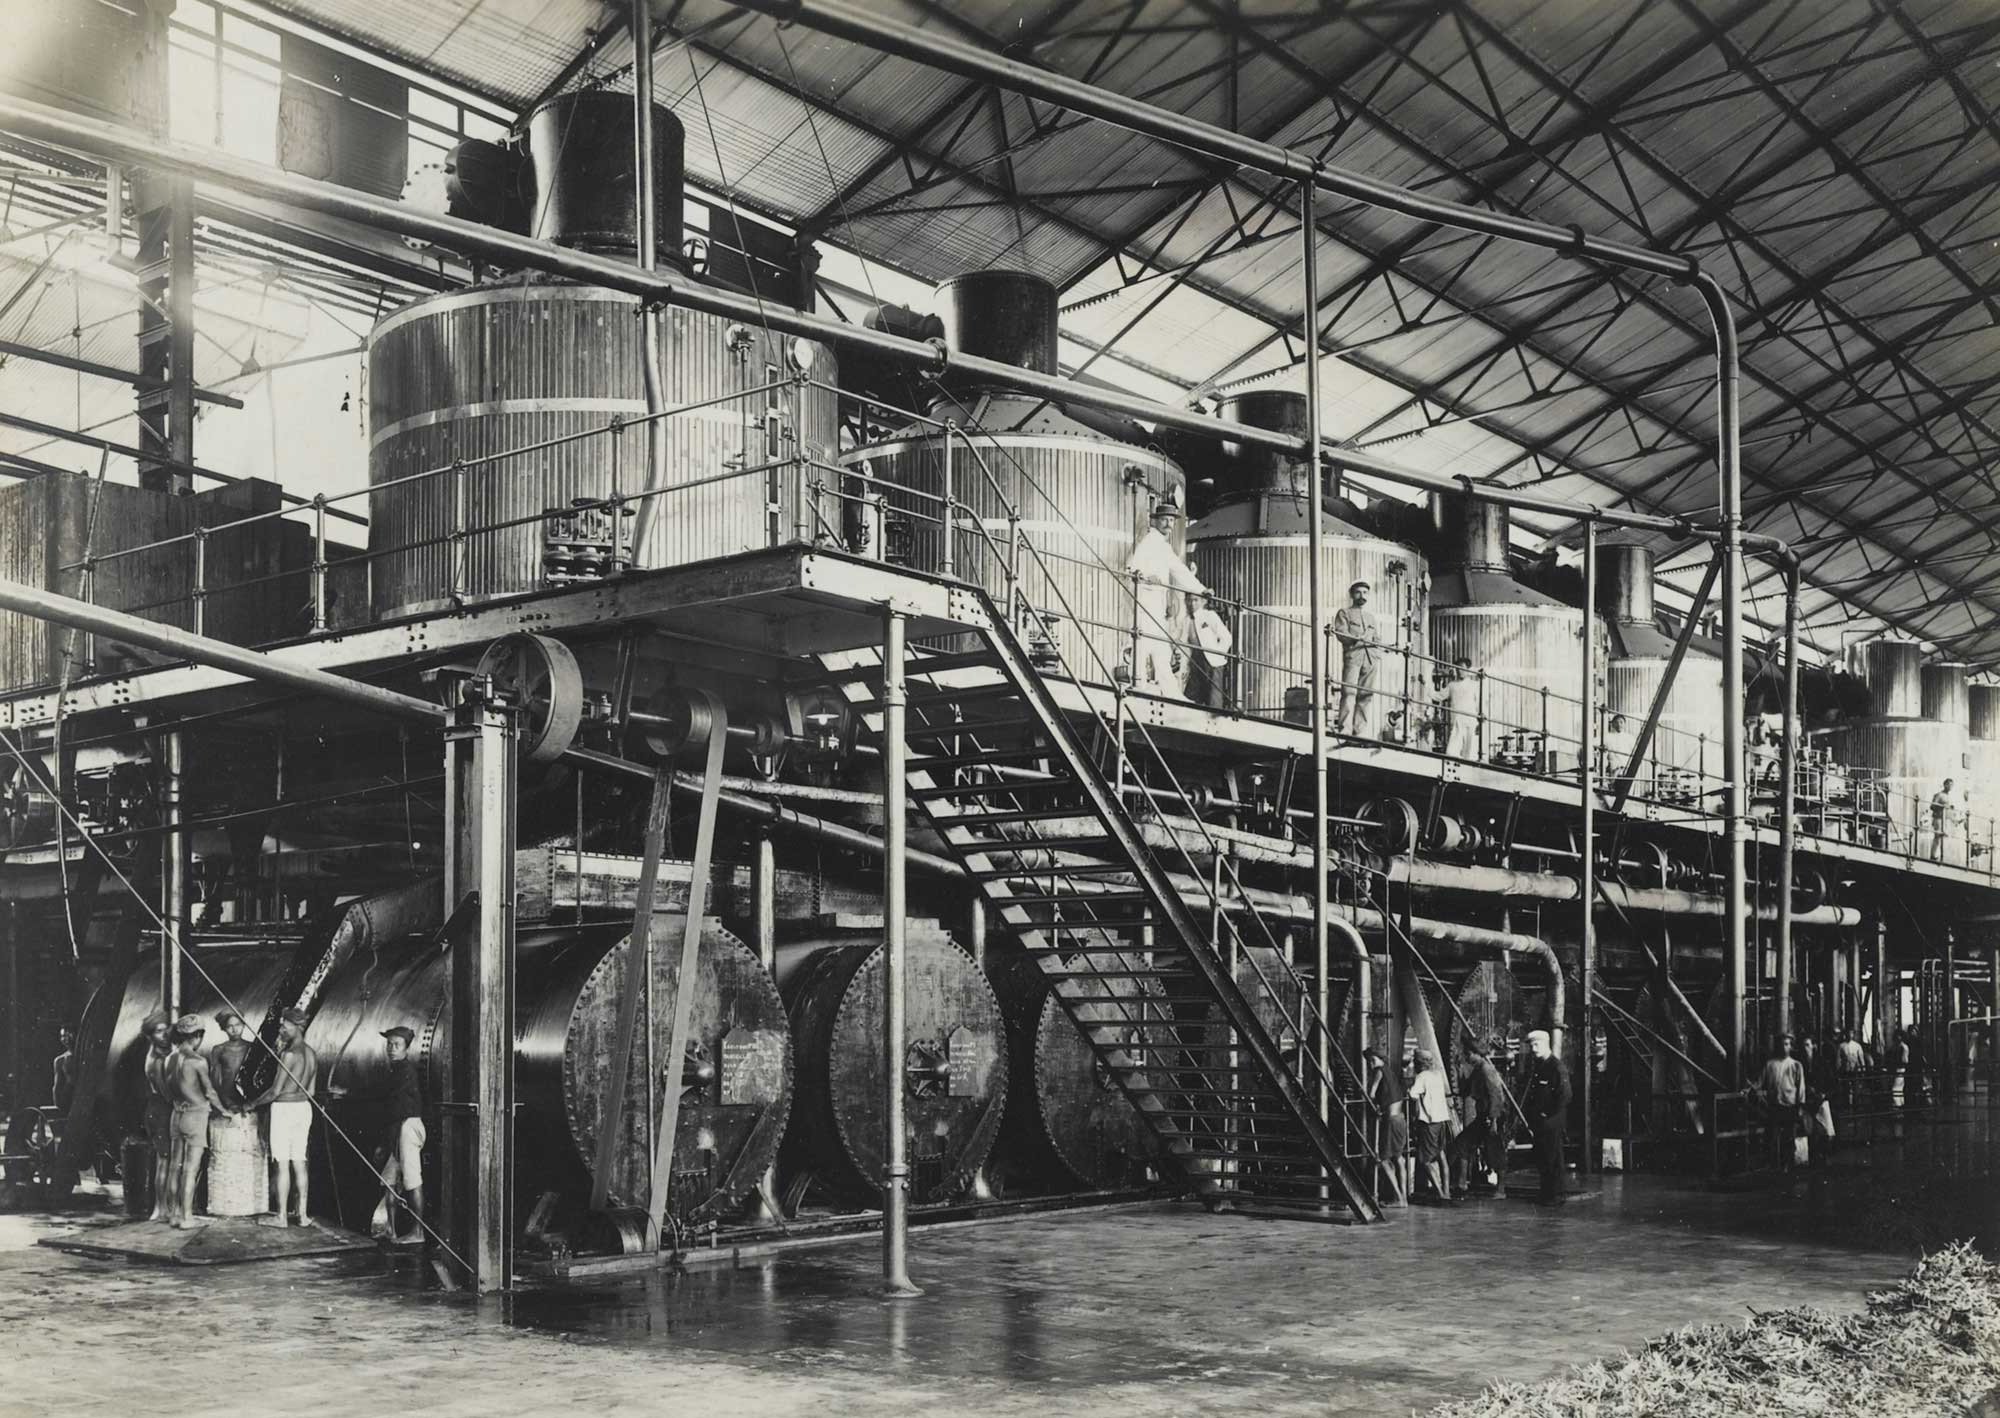 Black and white photograph of the inside of a sugar mill showing vacuum pans, Java, around 1915. The vacuum pans are a row of tall metal cylinders.